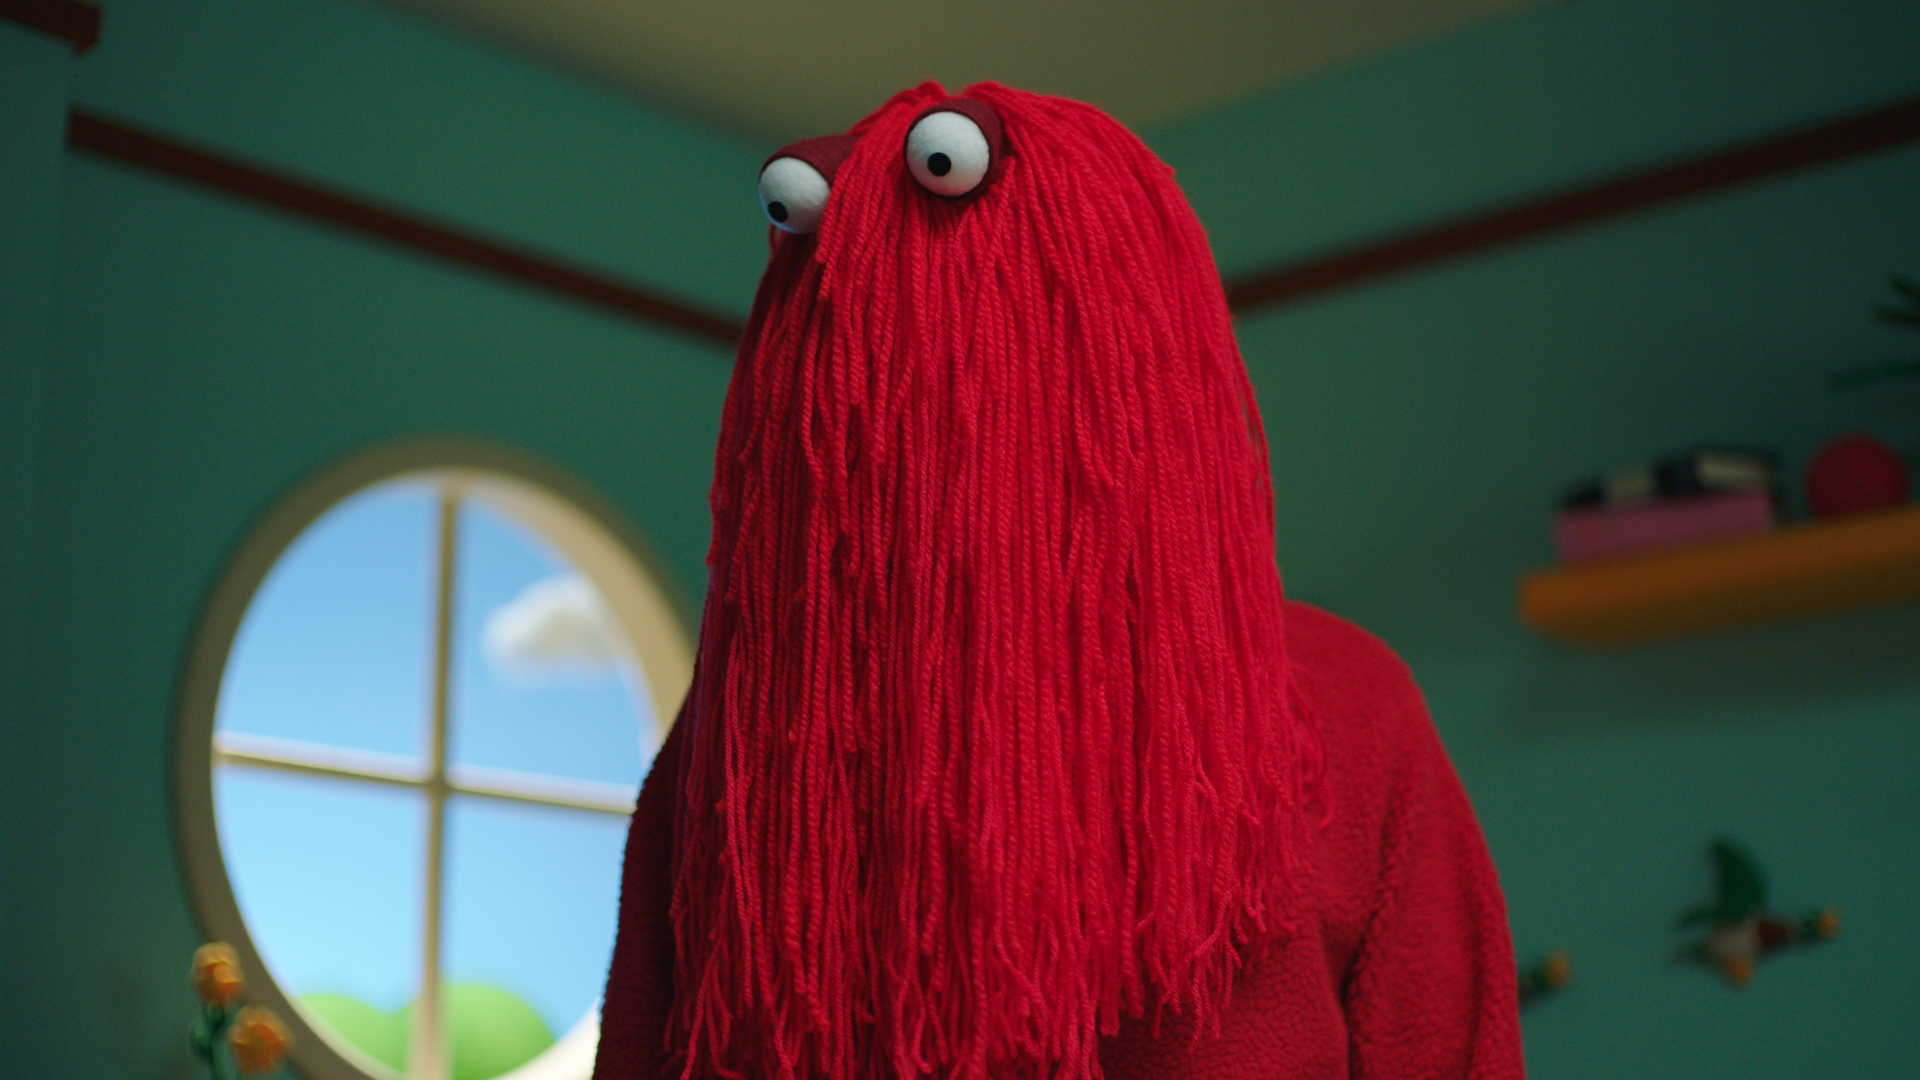 Red Guy in the new series of ’Don’t Hug Me I’m Scared’ on Channel 4